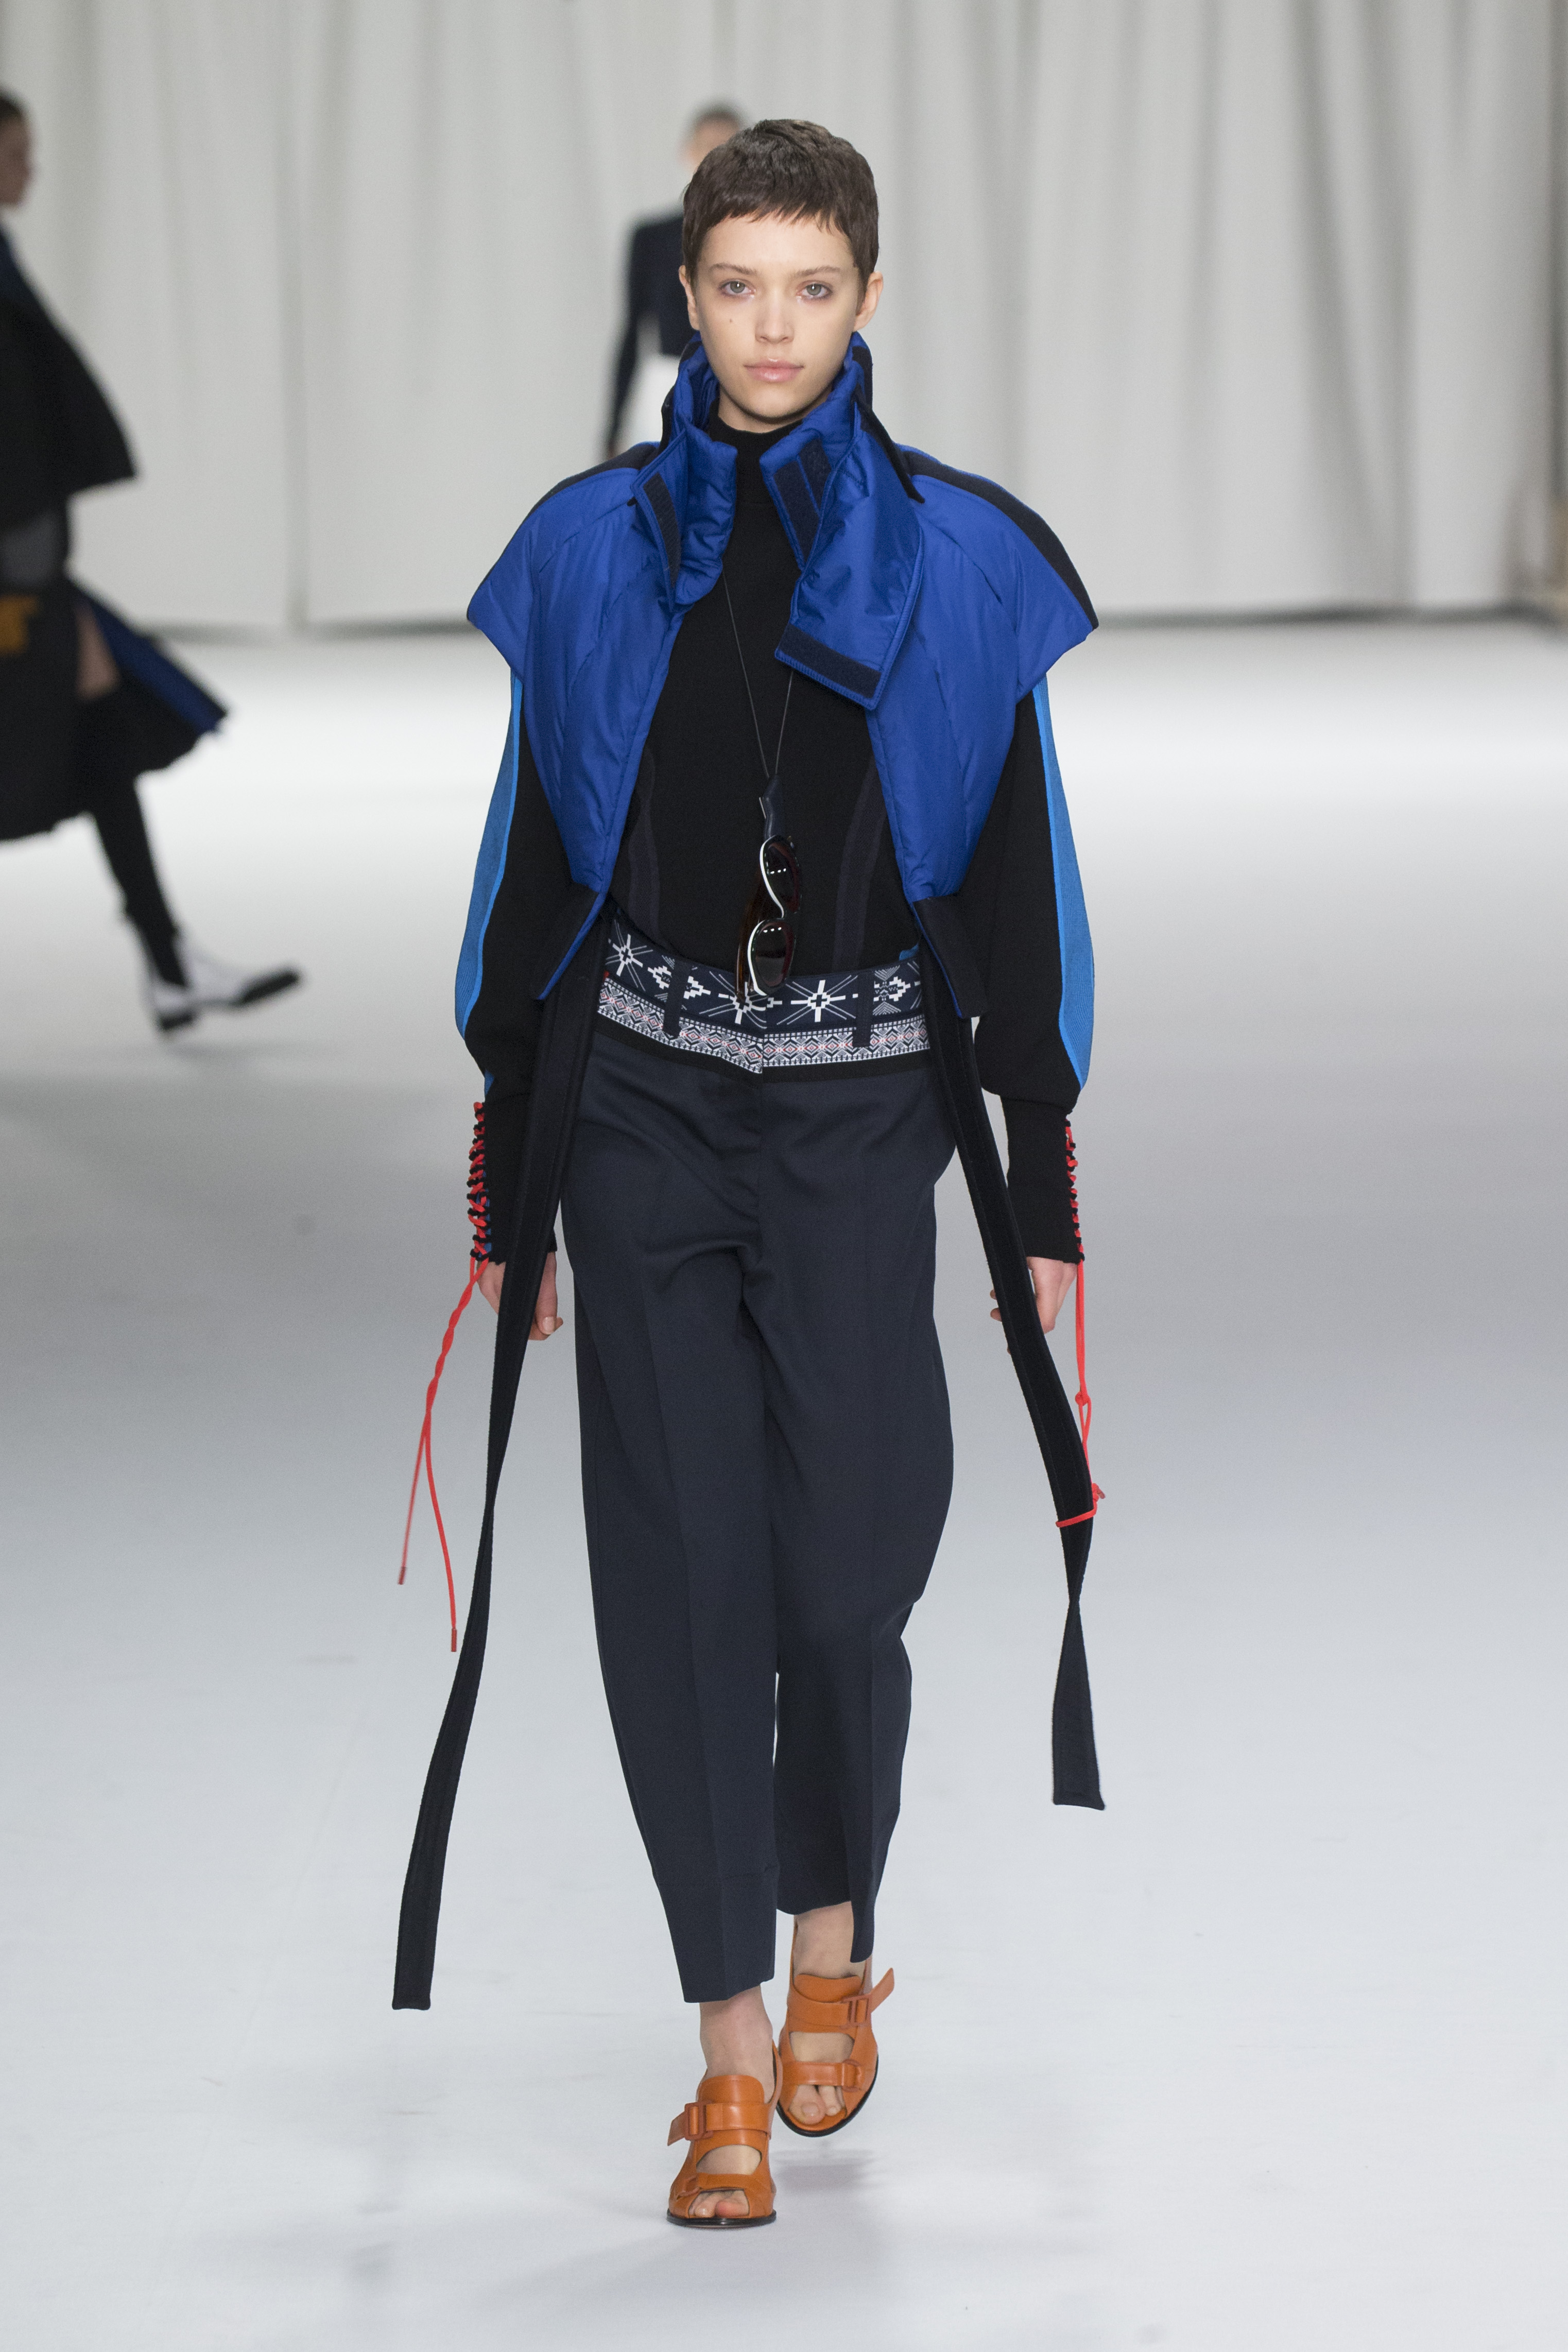 CLASSICS TEAMS UP WITH TECHNOLOGY AT SPORTMAX A/W 2018